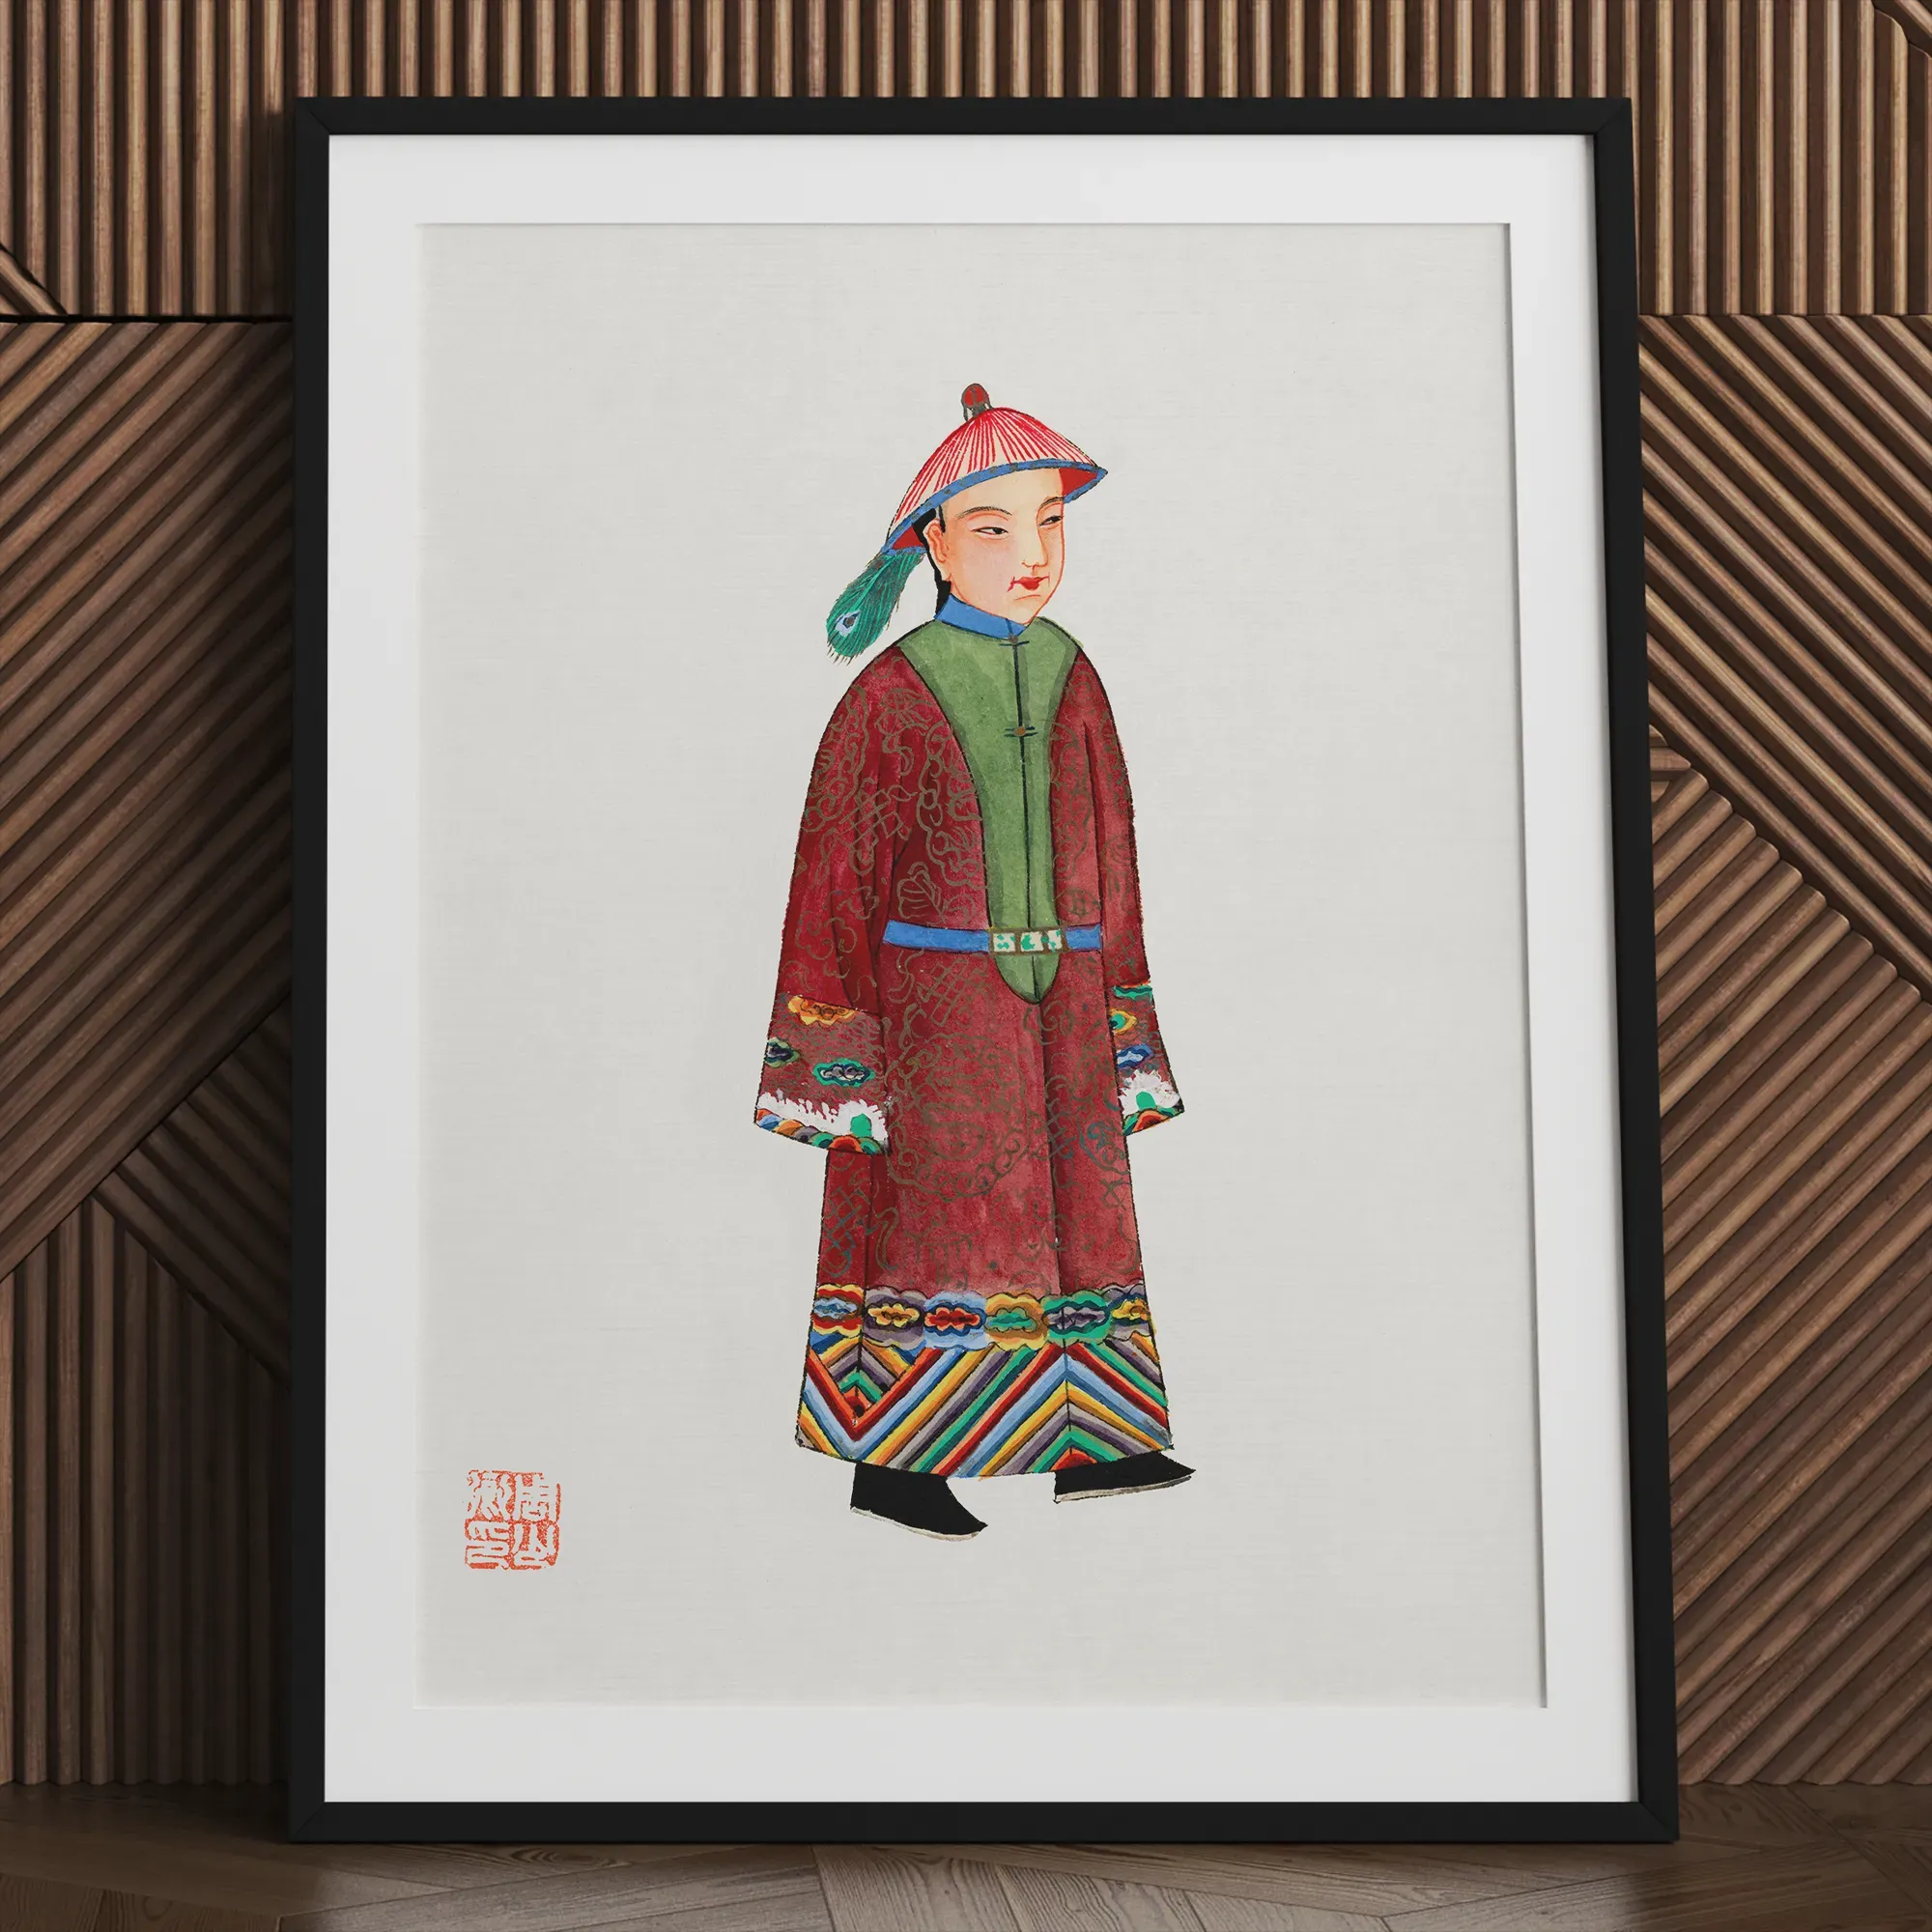 Chinese Dandy Framed & Mounted Print - Posters Prints & Visual Artwork - Aesthetic Art